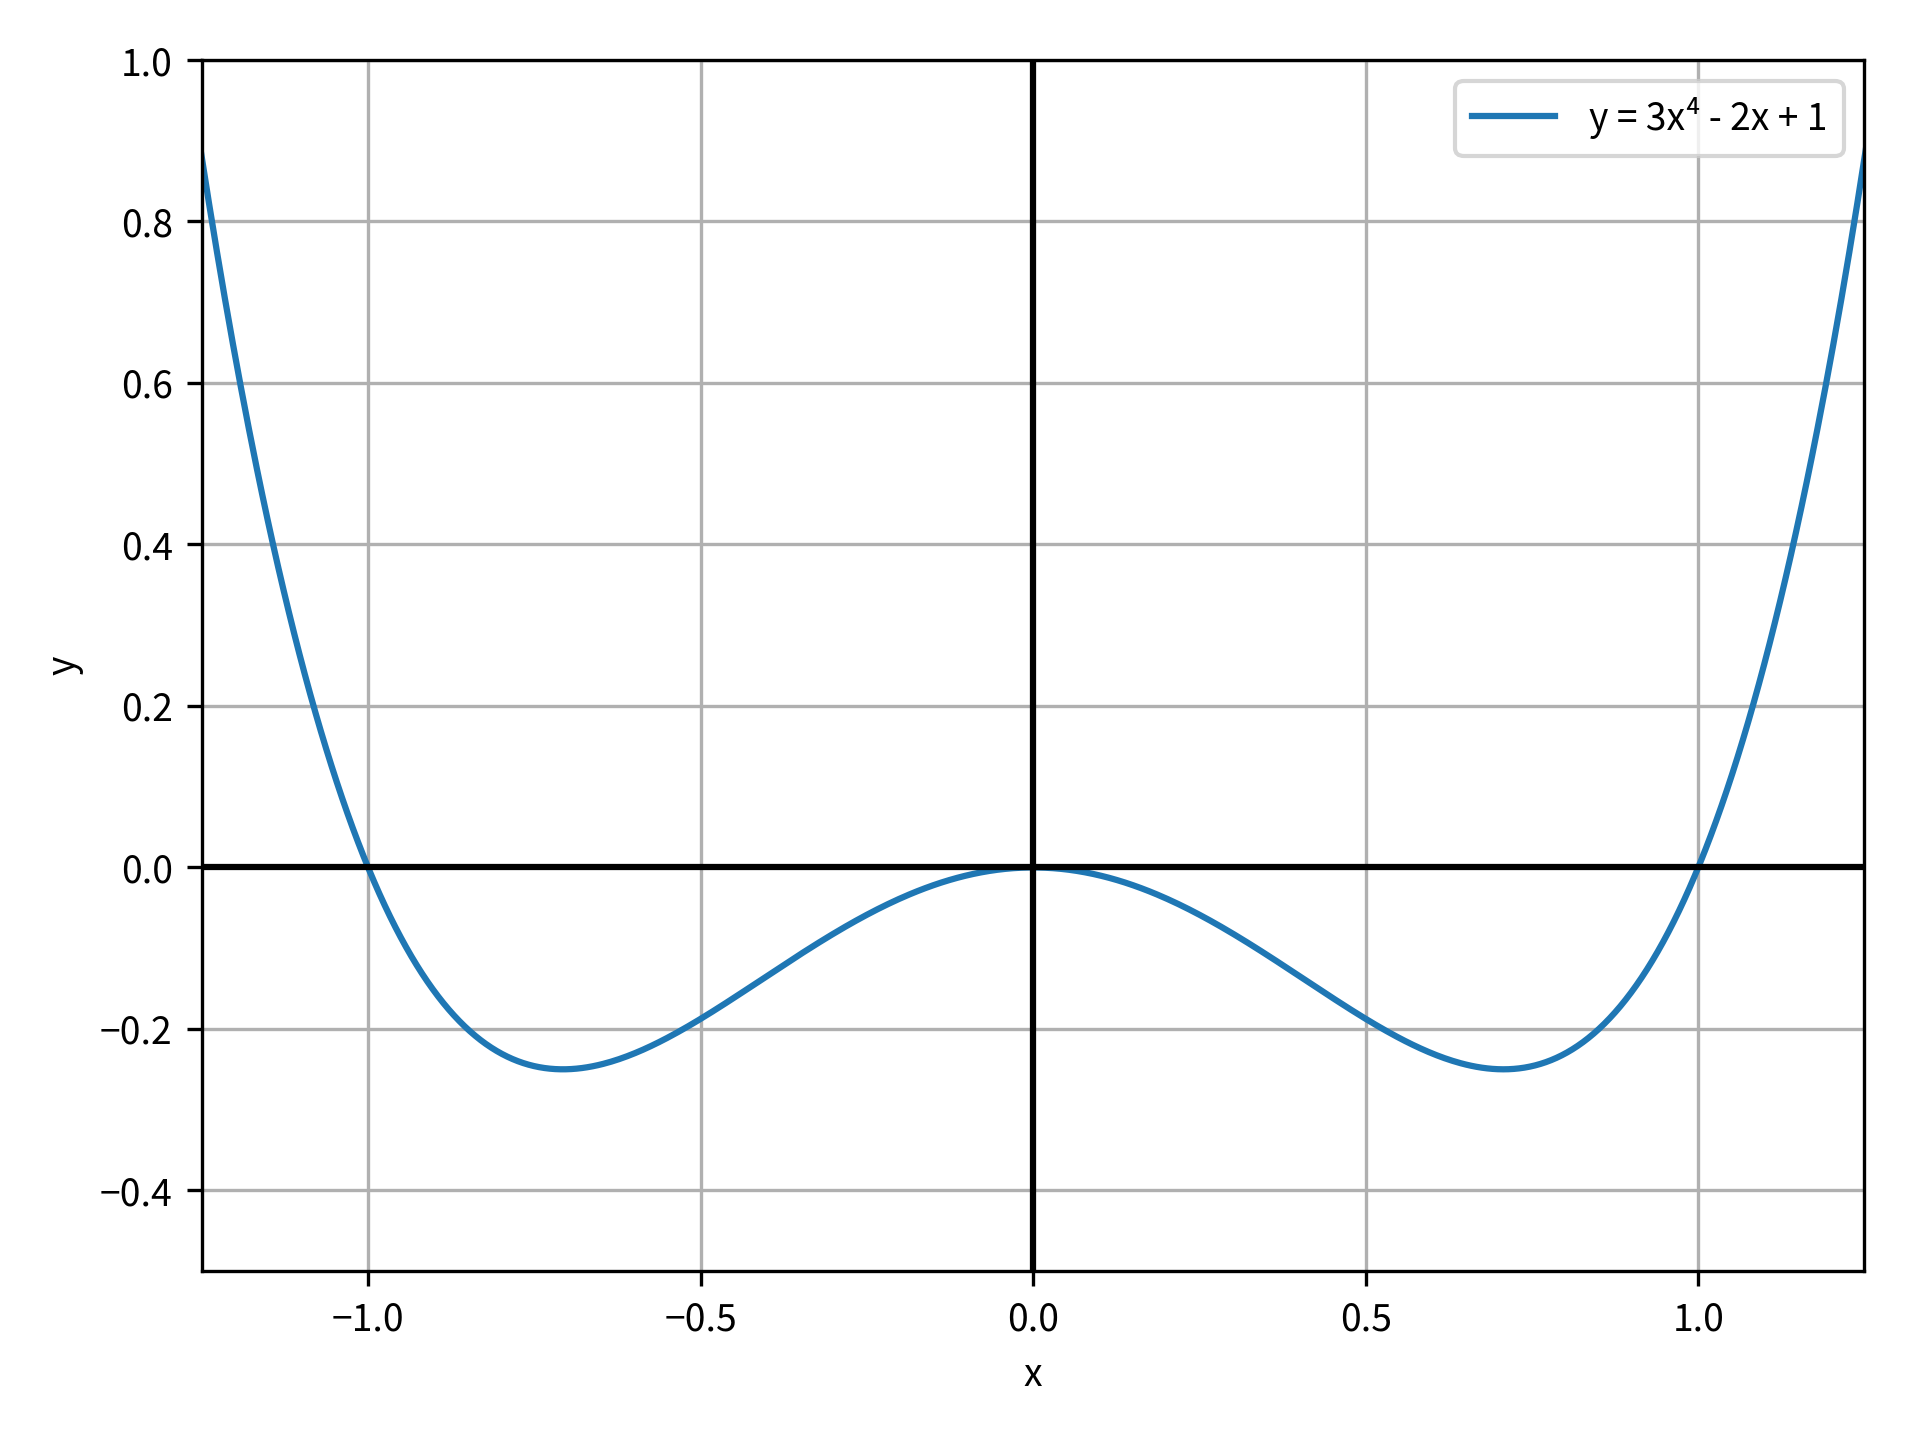 The function y=x⁴-x² plotted on the domain from from -1.25 to 1.25